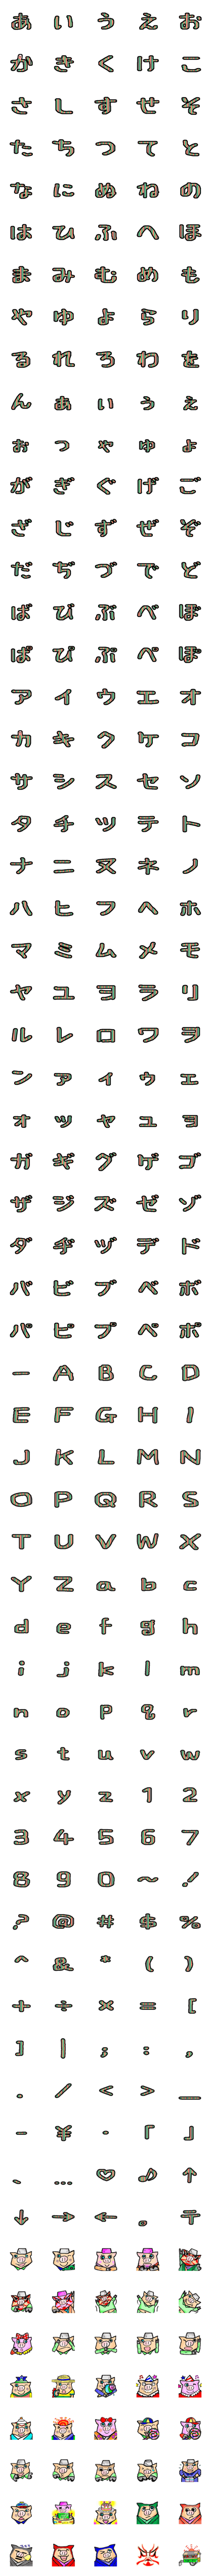 [LINE絵文字]かぶ～き亭／定式幕風文字の画像一覧